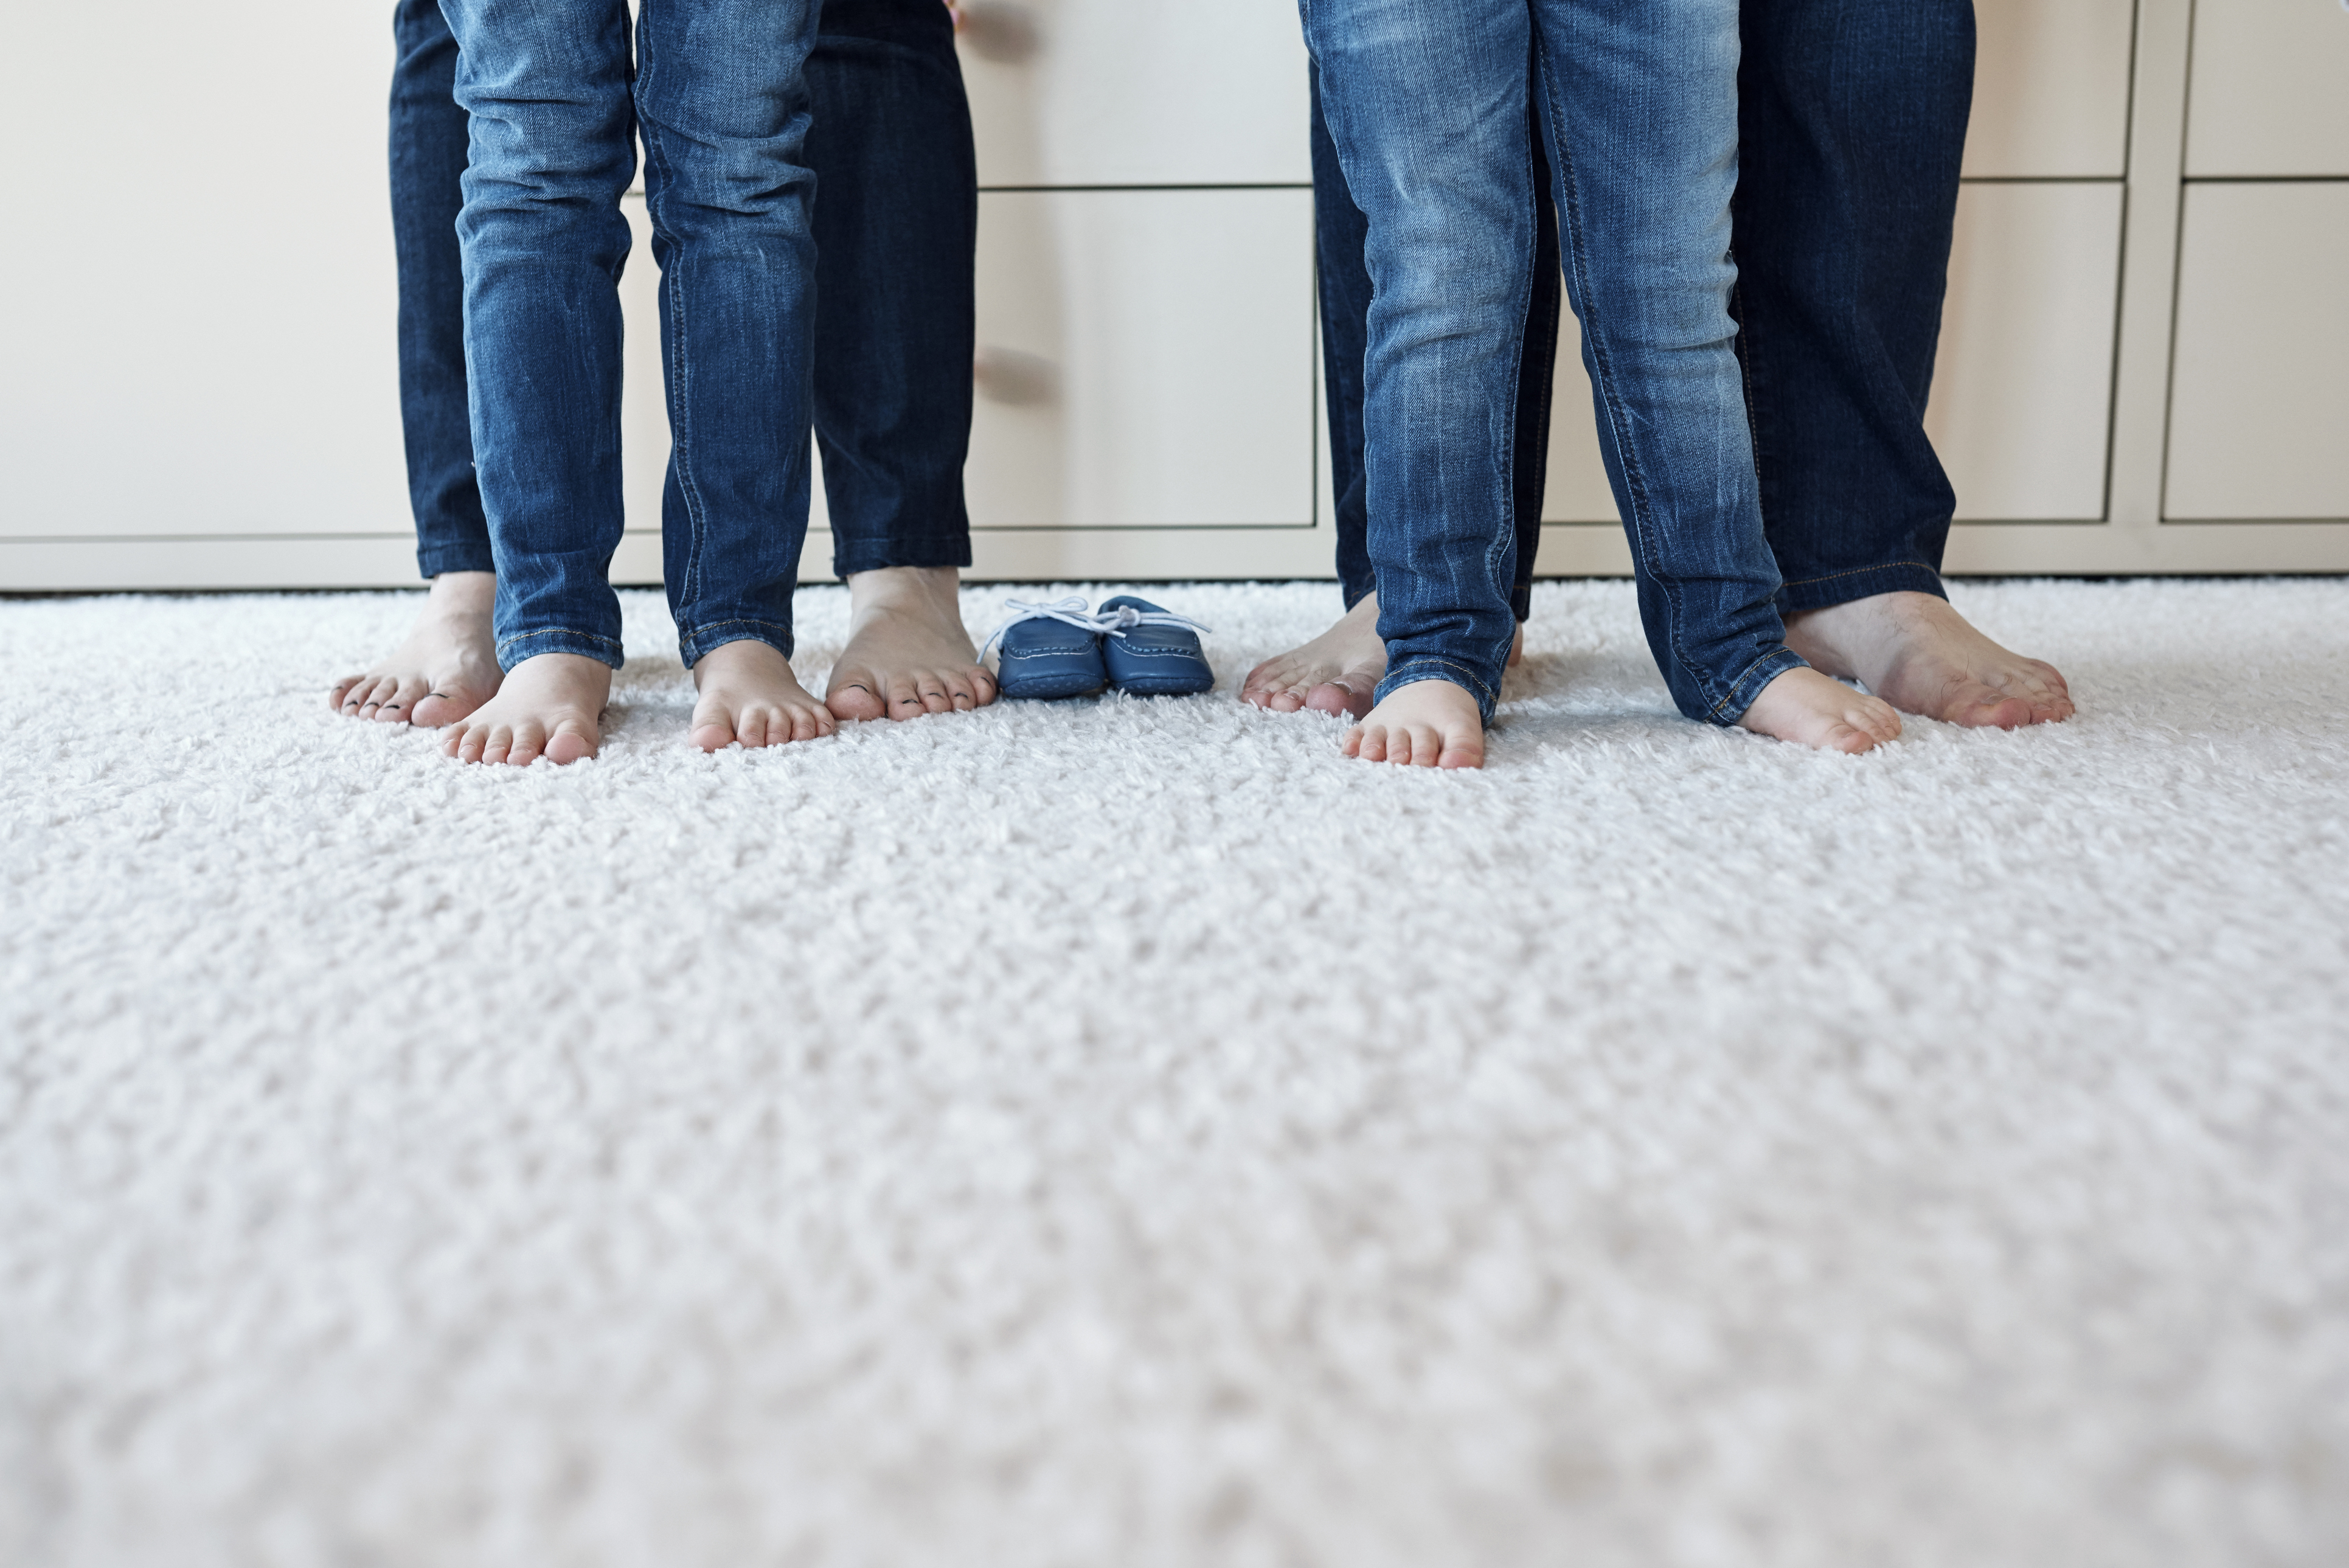 daughters, mother and father barefoot legs wearing jeans.photo taken in bedroom, unrecognizable persons.